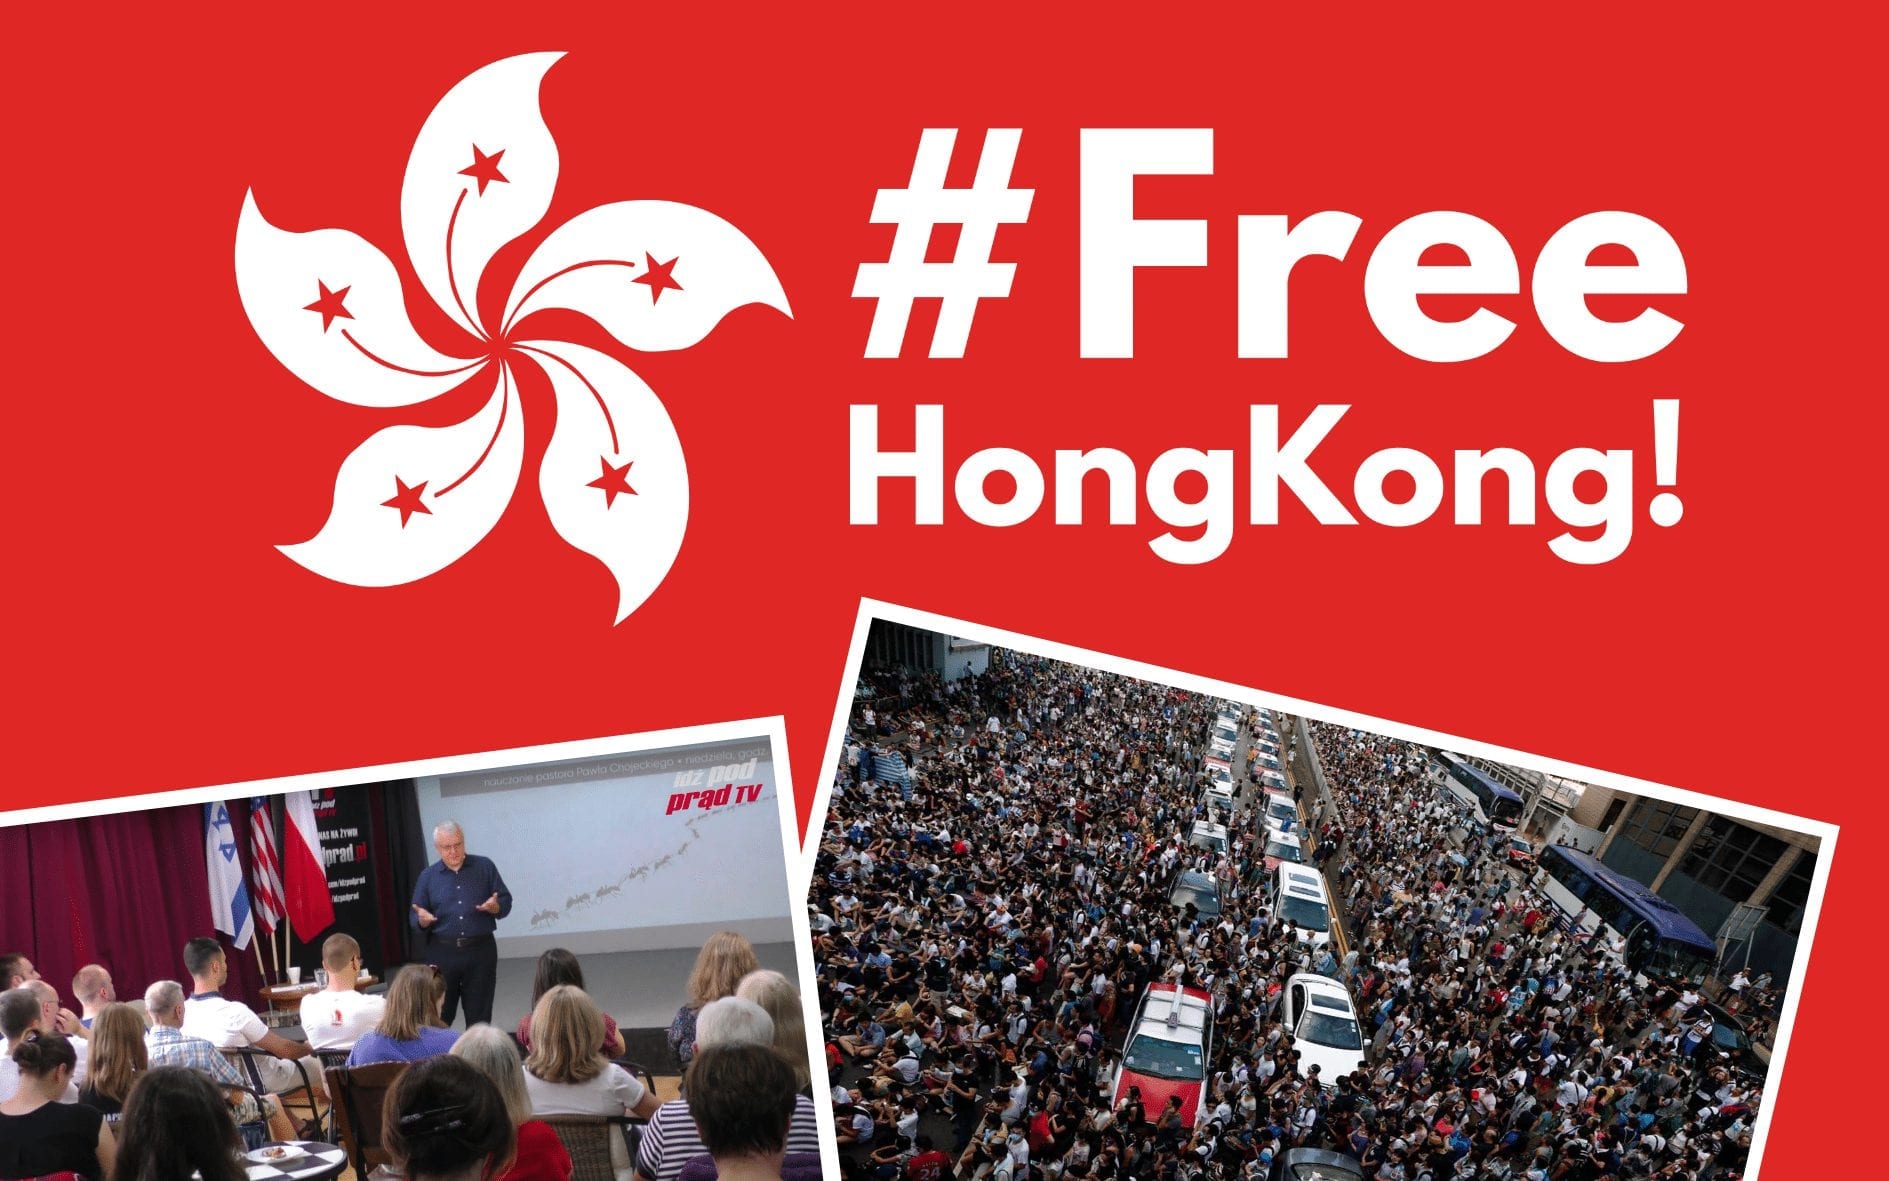 A church in Poland is praying for free Hong Kong